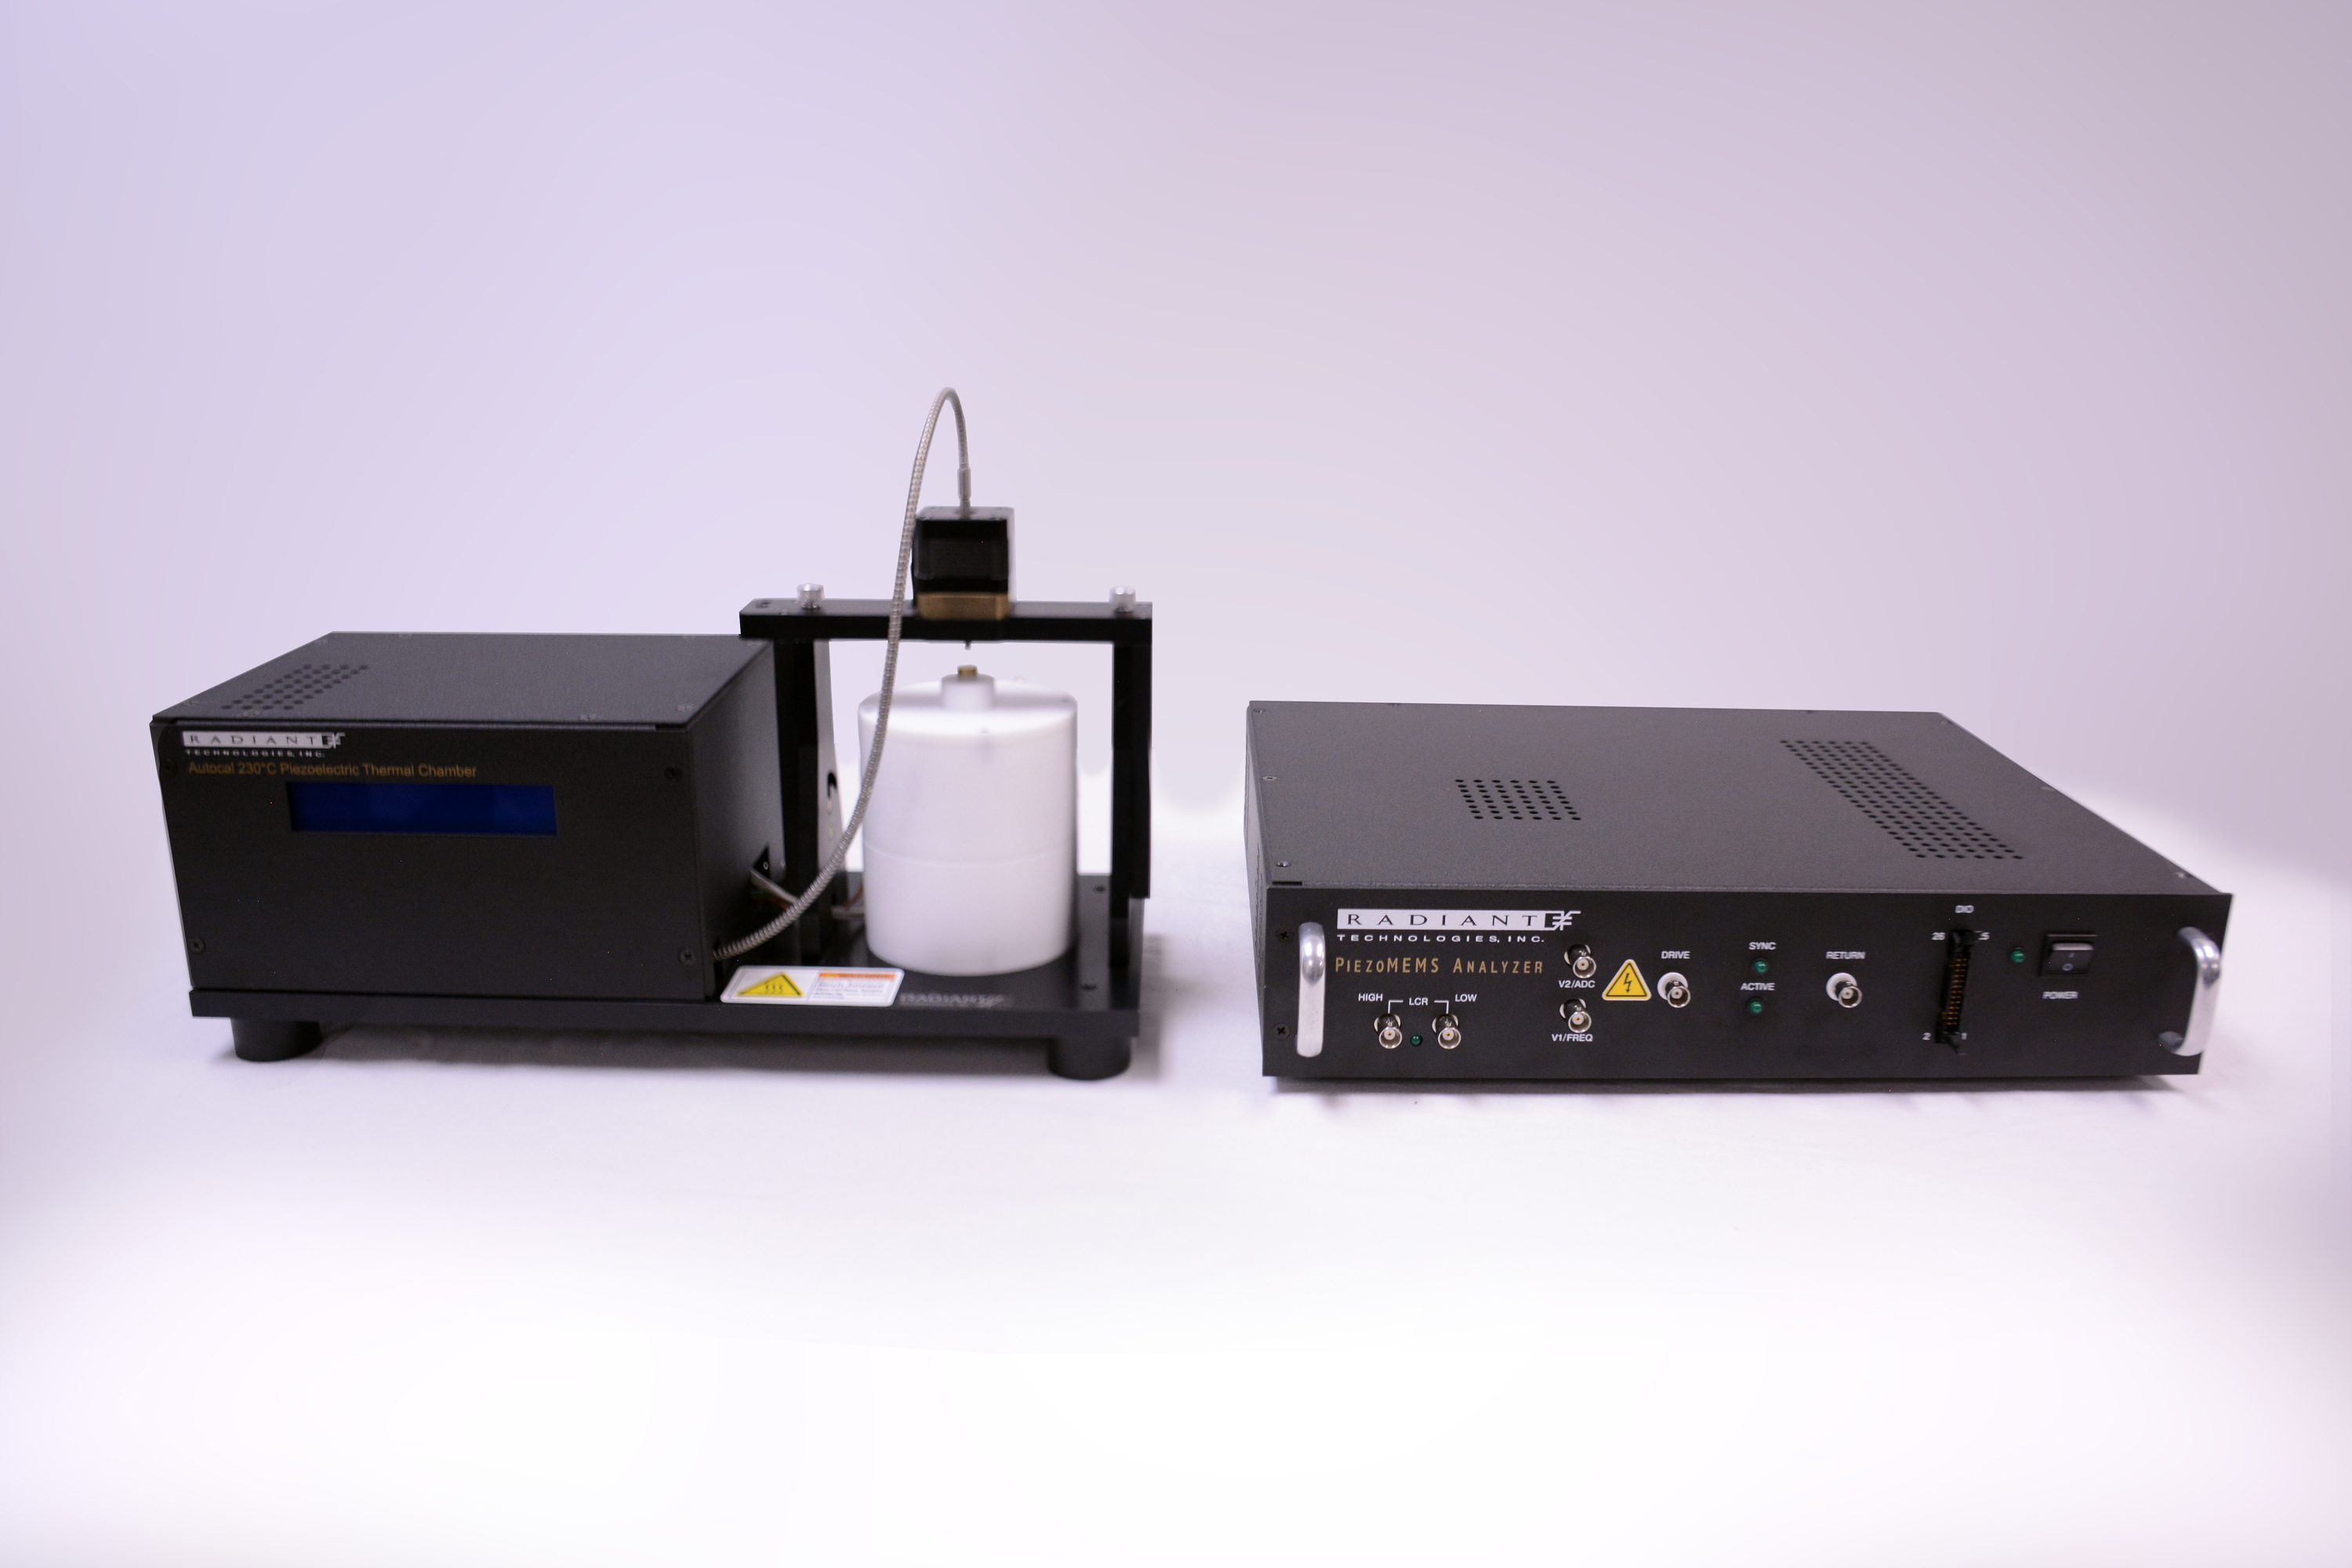 Image of a Radiant Technologies Piezoelectric Testing setup utilizing a Radiant Technologies AutoCal 230°C and a Radiant Technologies PiezoMEMS Analyzer